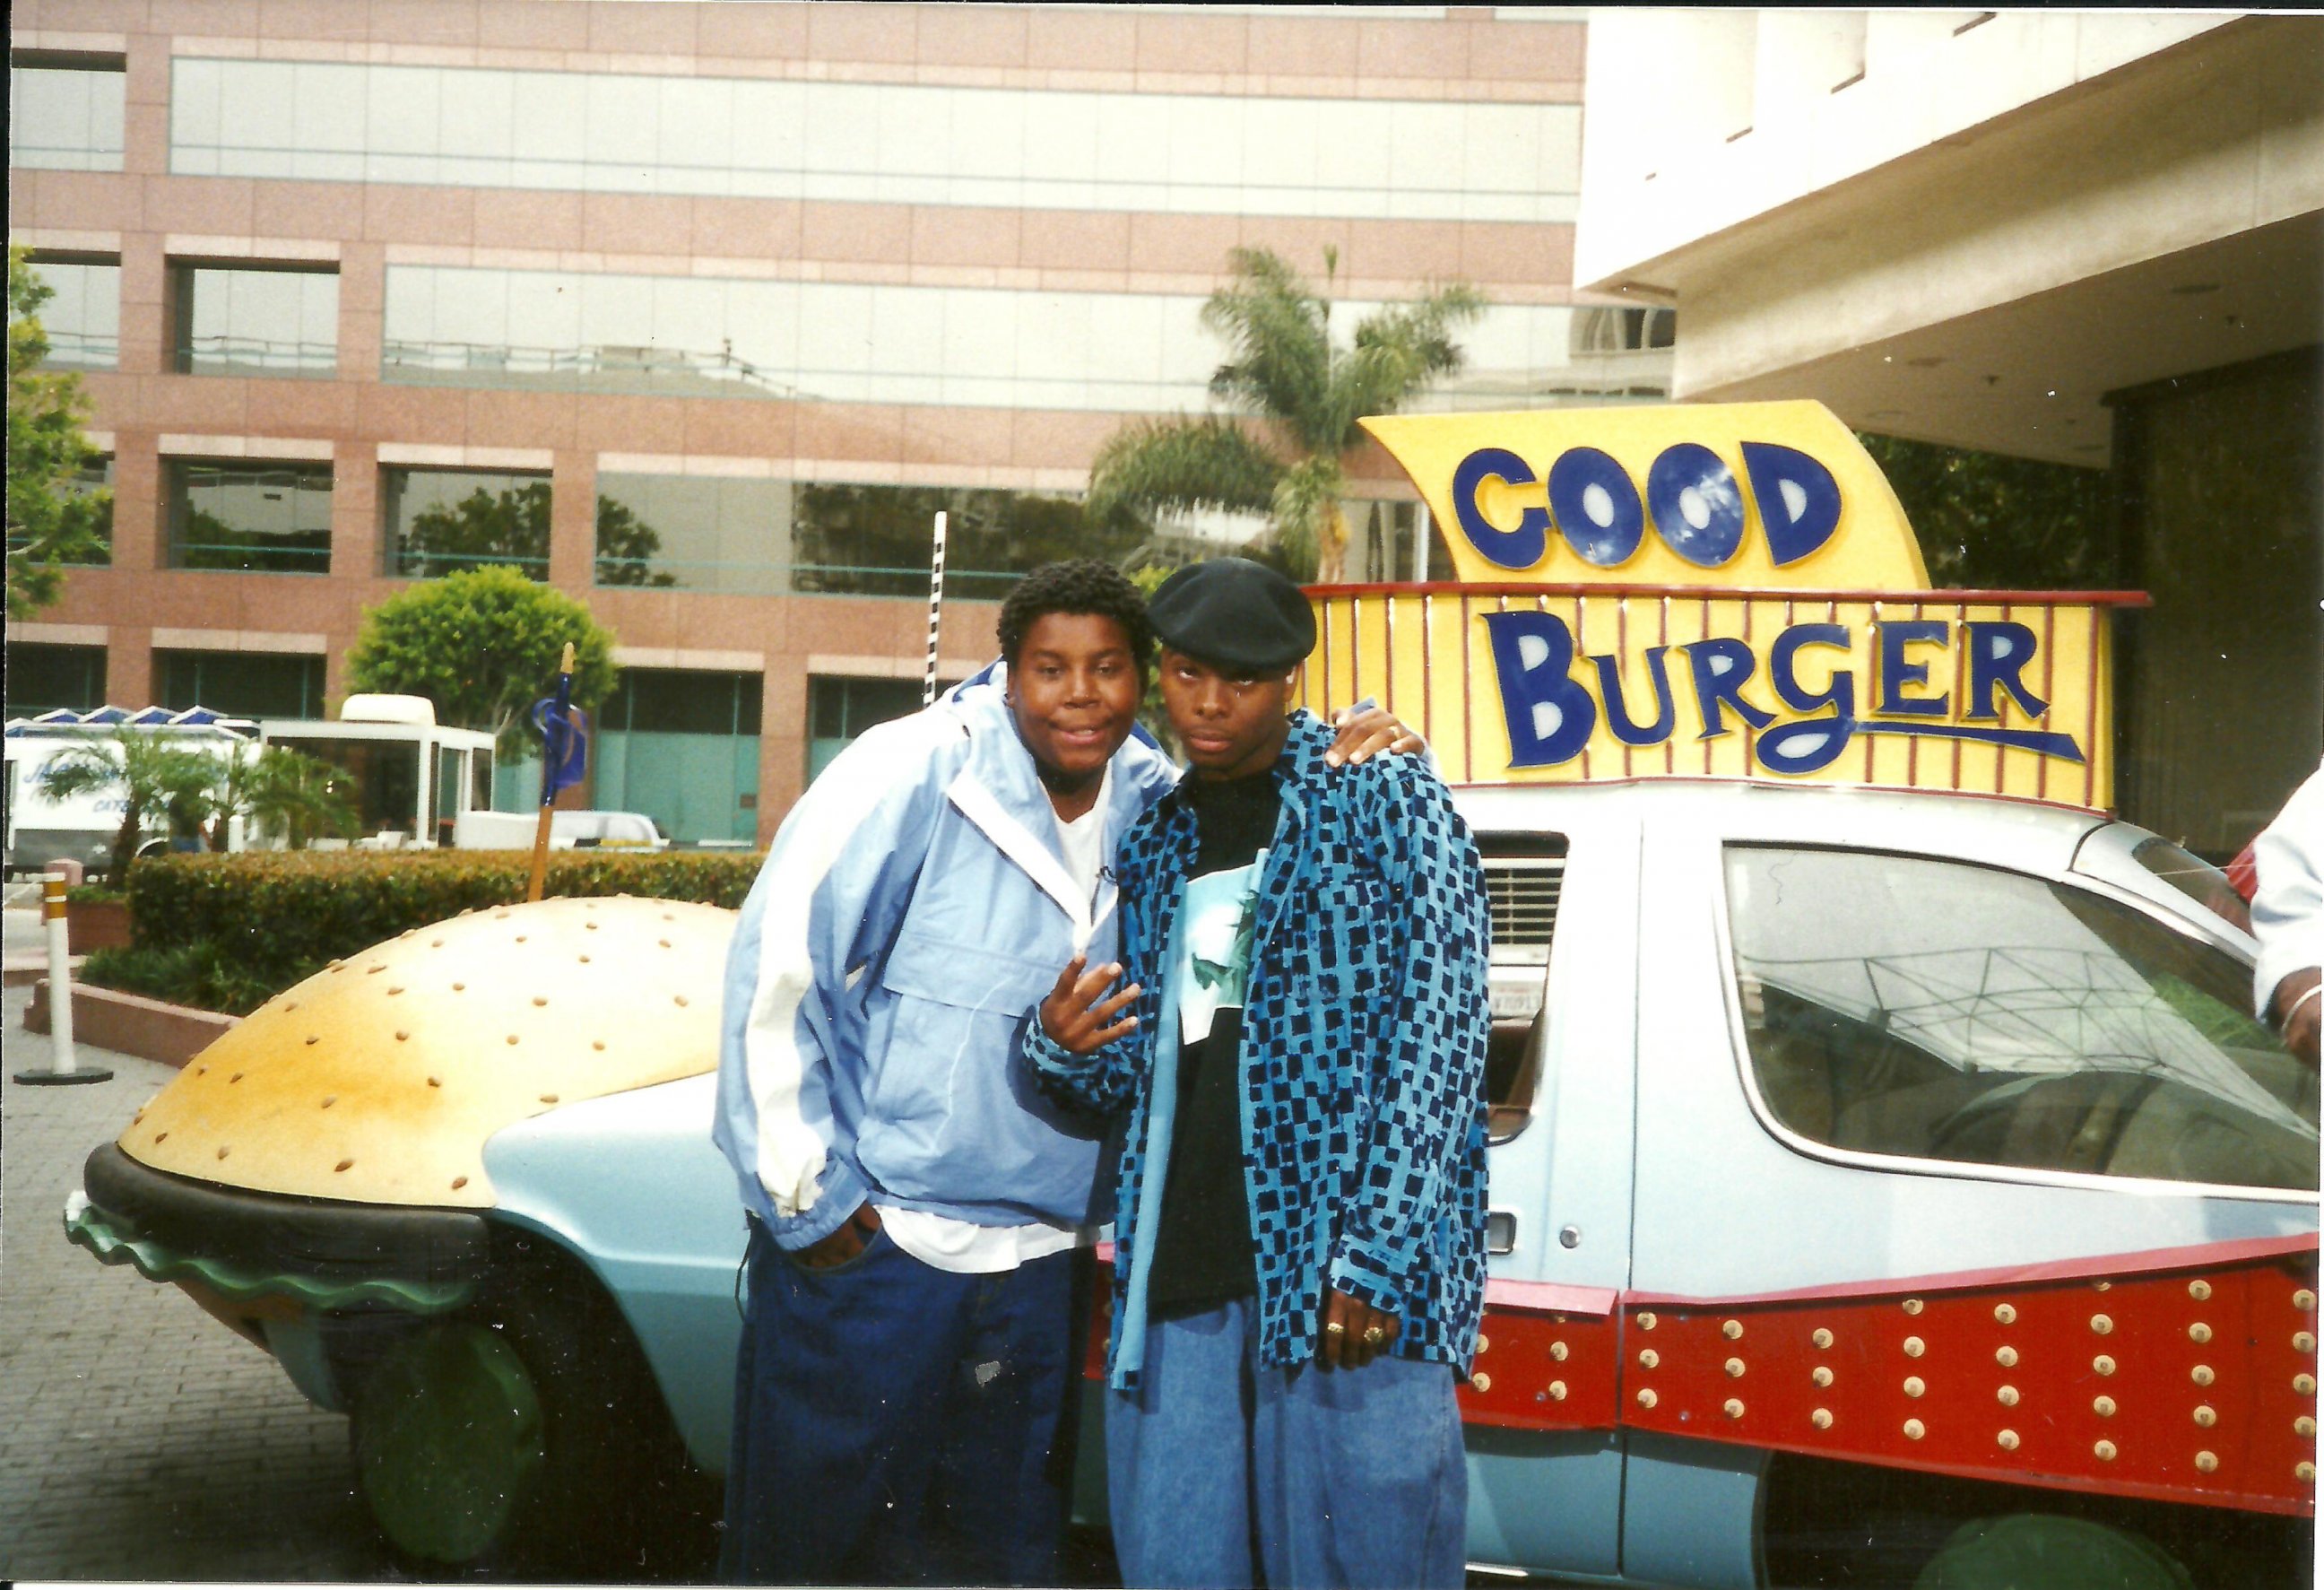 PHOTO: Kel Mitchell and Kenan Thompson pose with a Good Burger vehicle. Mitchell and Thompson starred in the movie "Good Burger," which was based on an "All That" sketch.